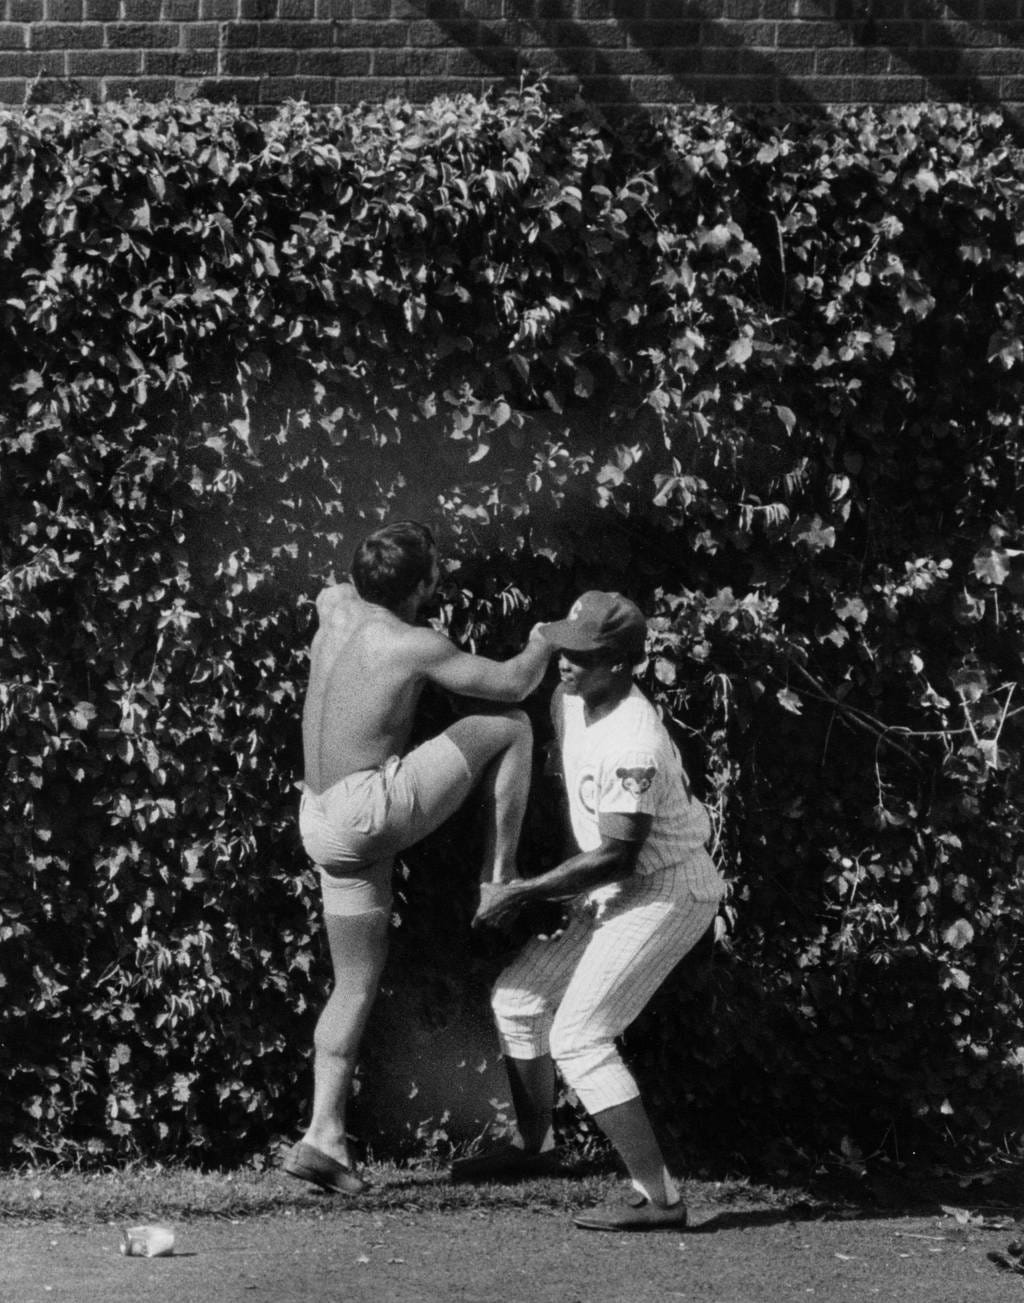 Cubs outfielder Willie Smith gives a fan a boost.